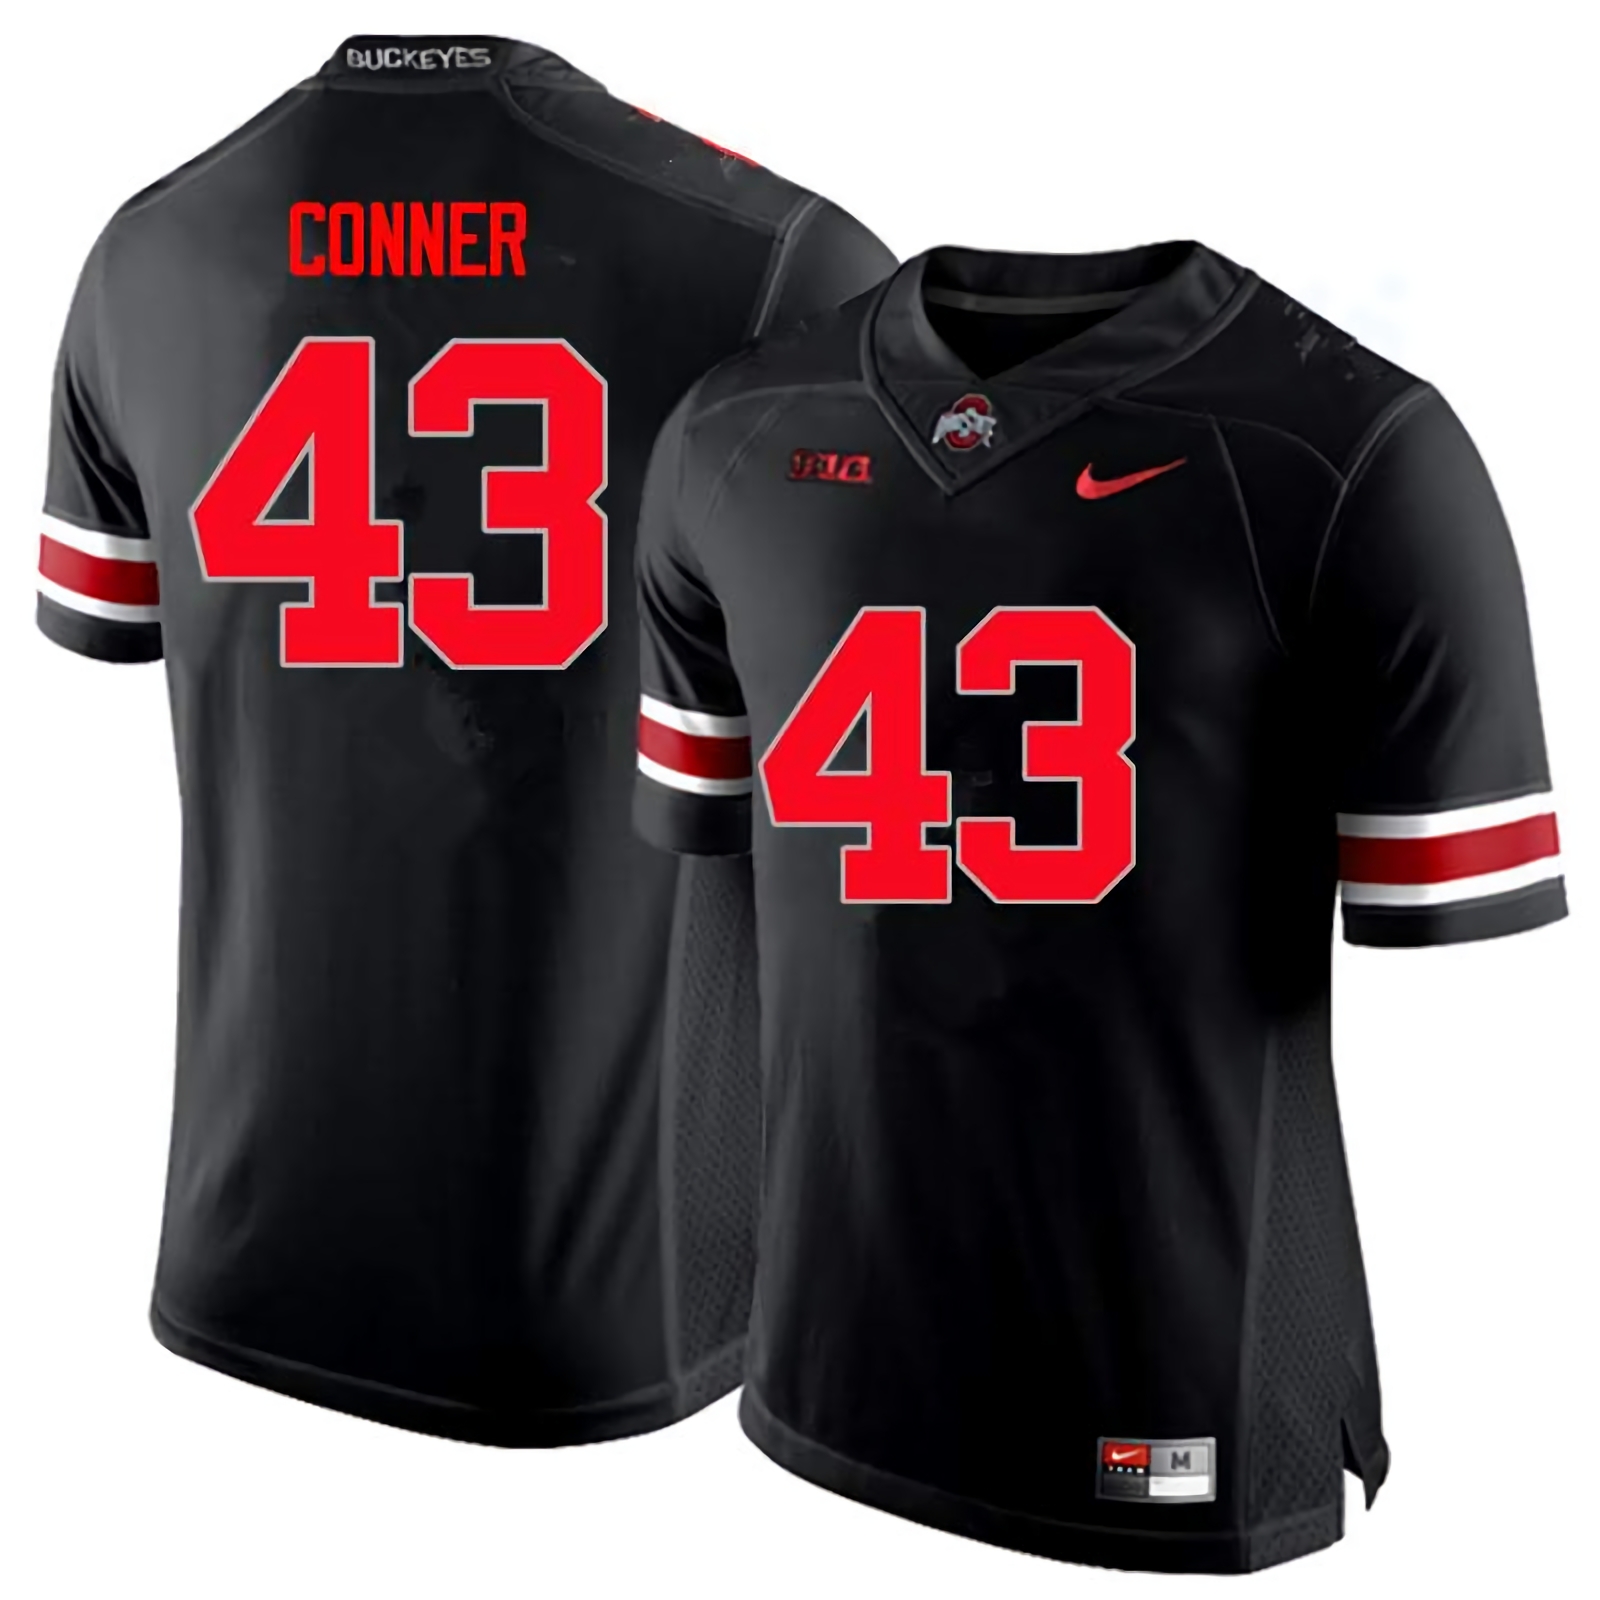 Nick Conner Ohio State Buckeyes Men's NCAA #43 Nike Black Limited College Stitched Football Jersey HIW8156BM